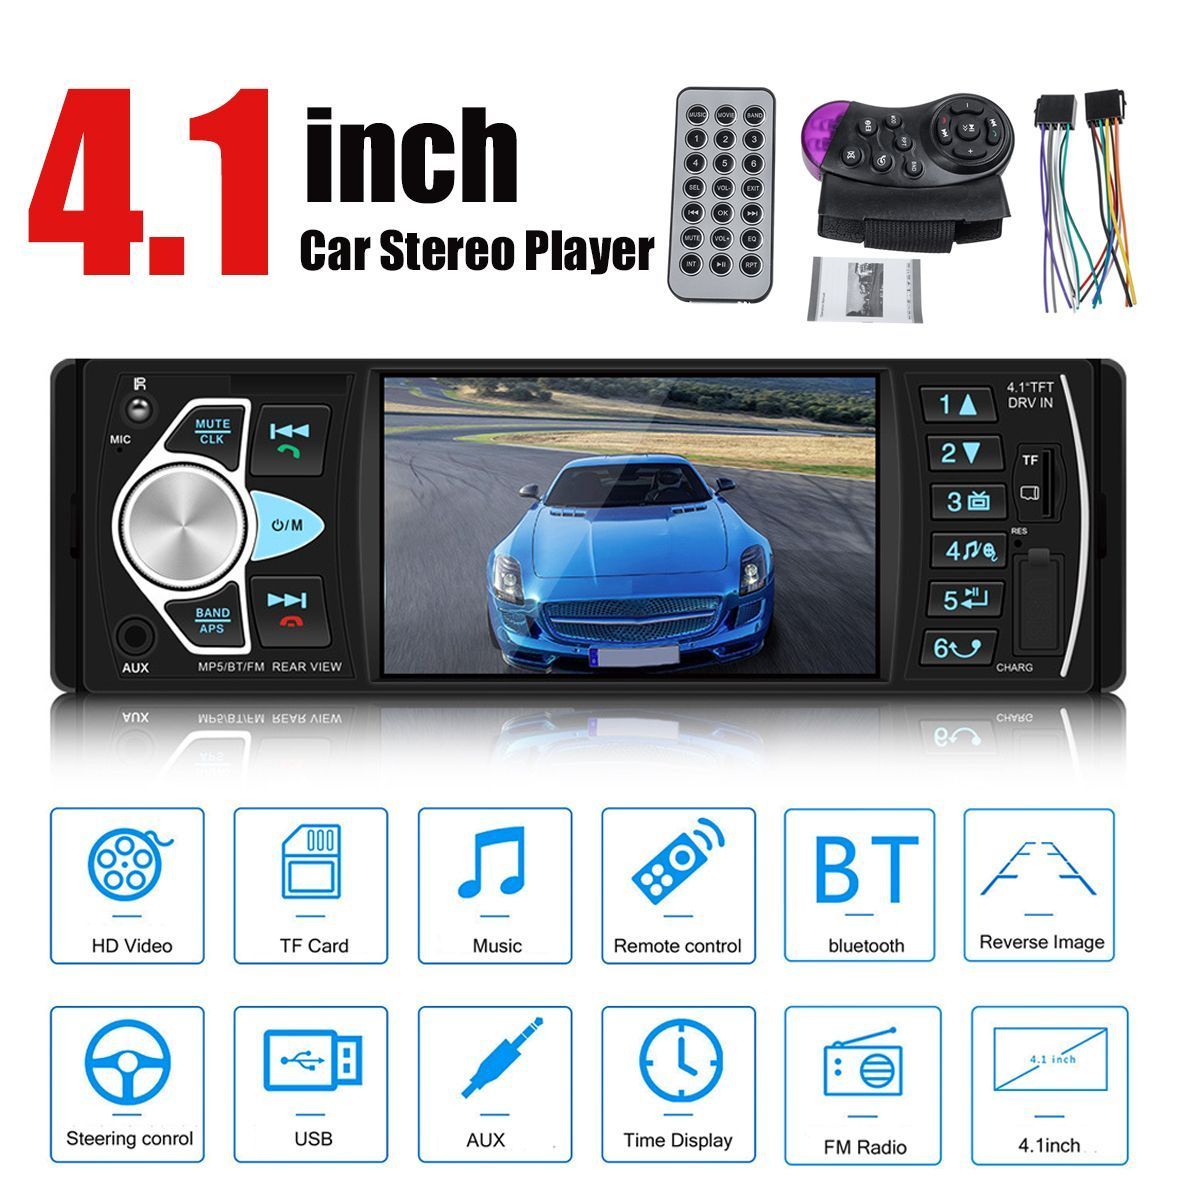 4022D-41-Inch-1Din-Wince-Car-Radio-Stereo-Auto-MP5-MP3-Player-HD-Screen-bluetooth-FM-AUX-TF-Support--1628974